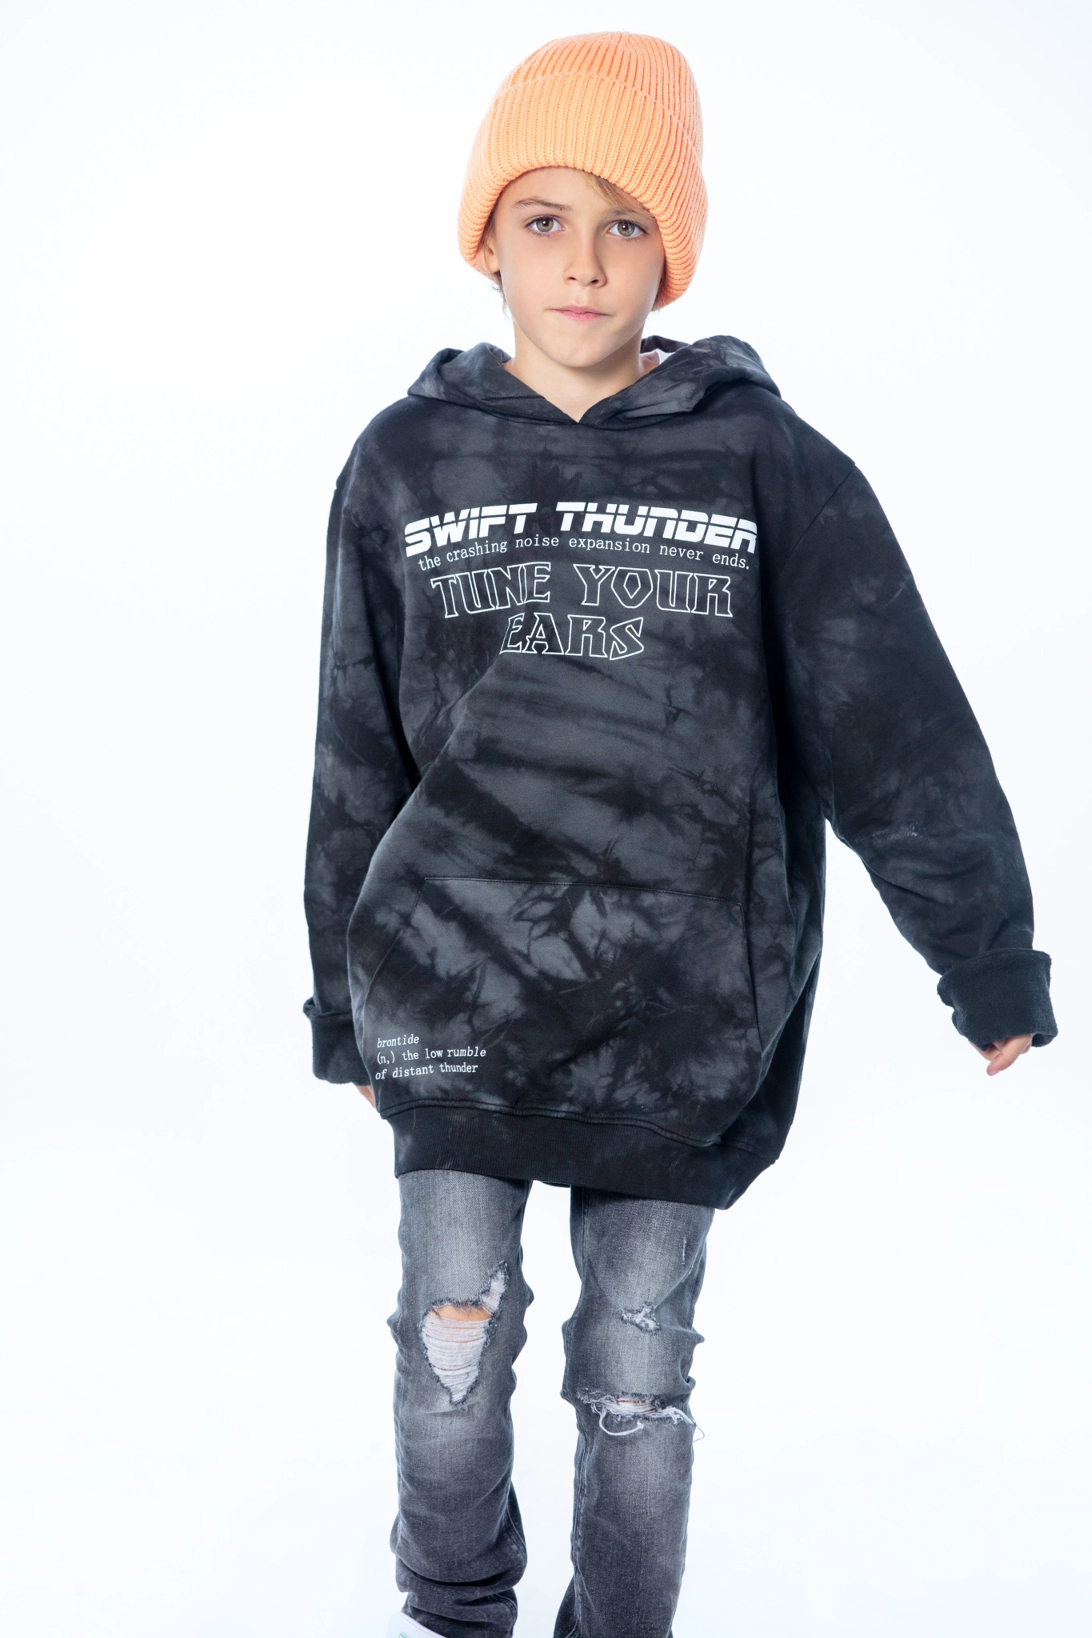 Kid walking towards camera wearing a black hoodie with printed lettering and ripped jeans